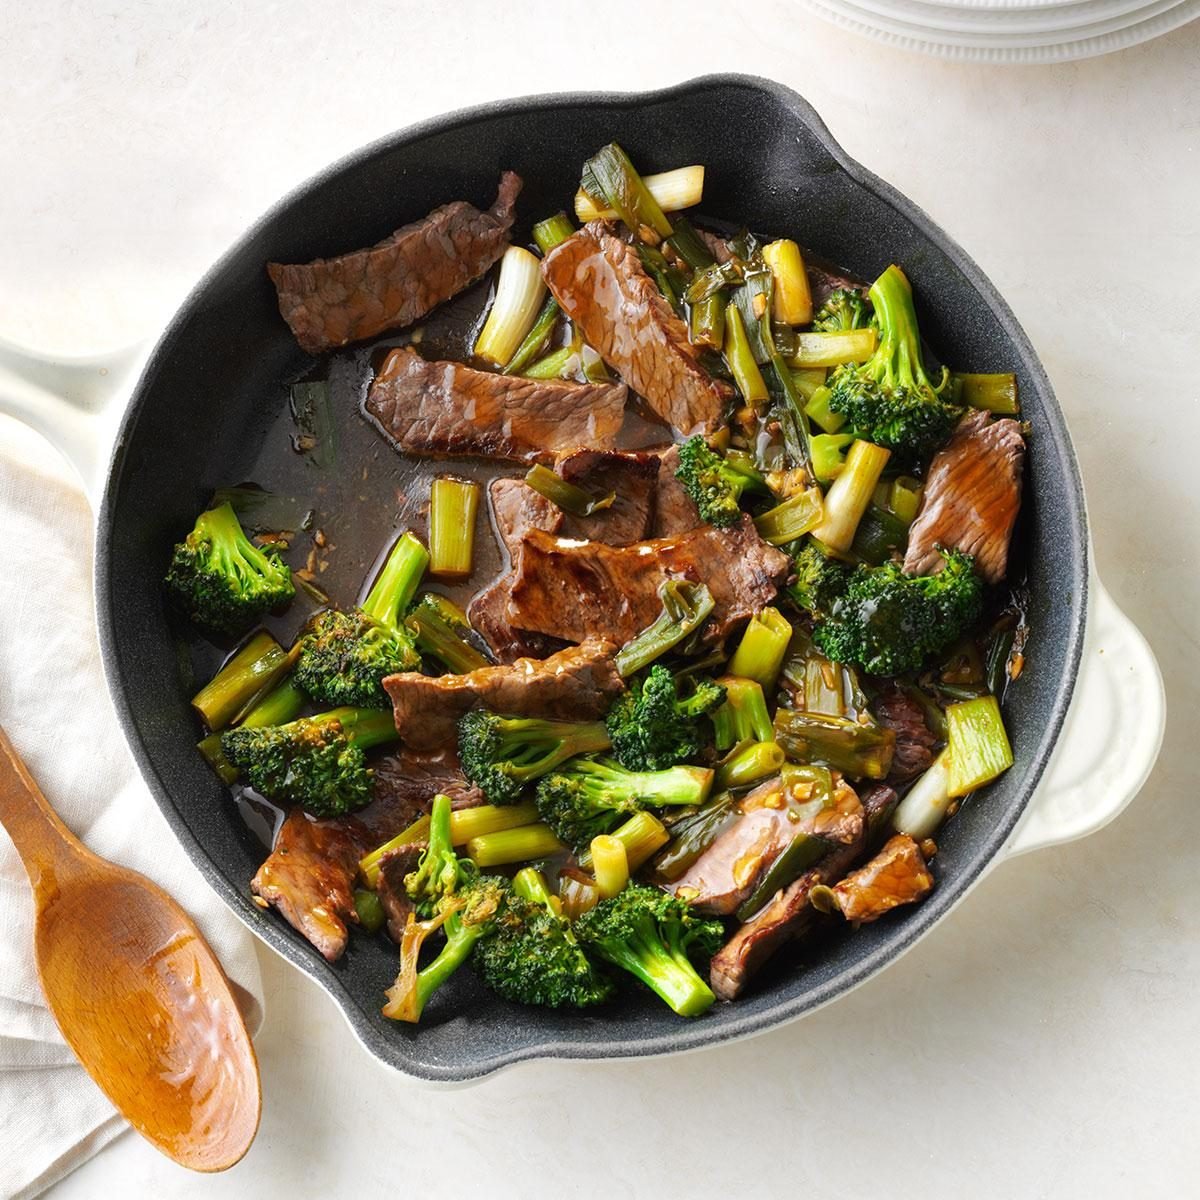 Day 4 Dinner: Saucy Beef with Broccoli